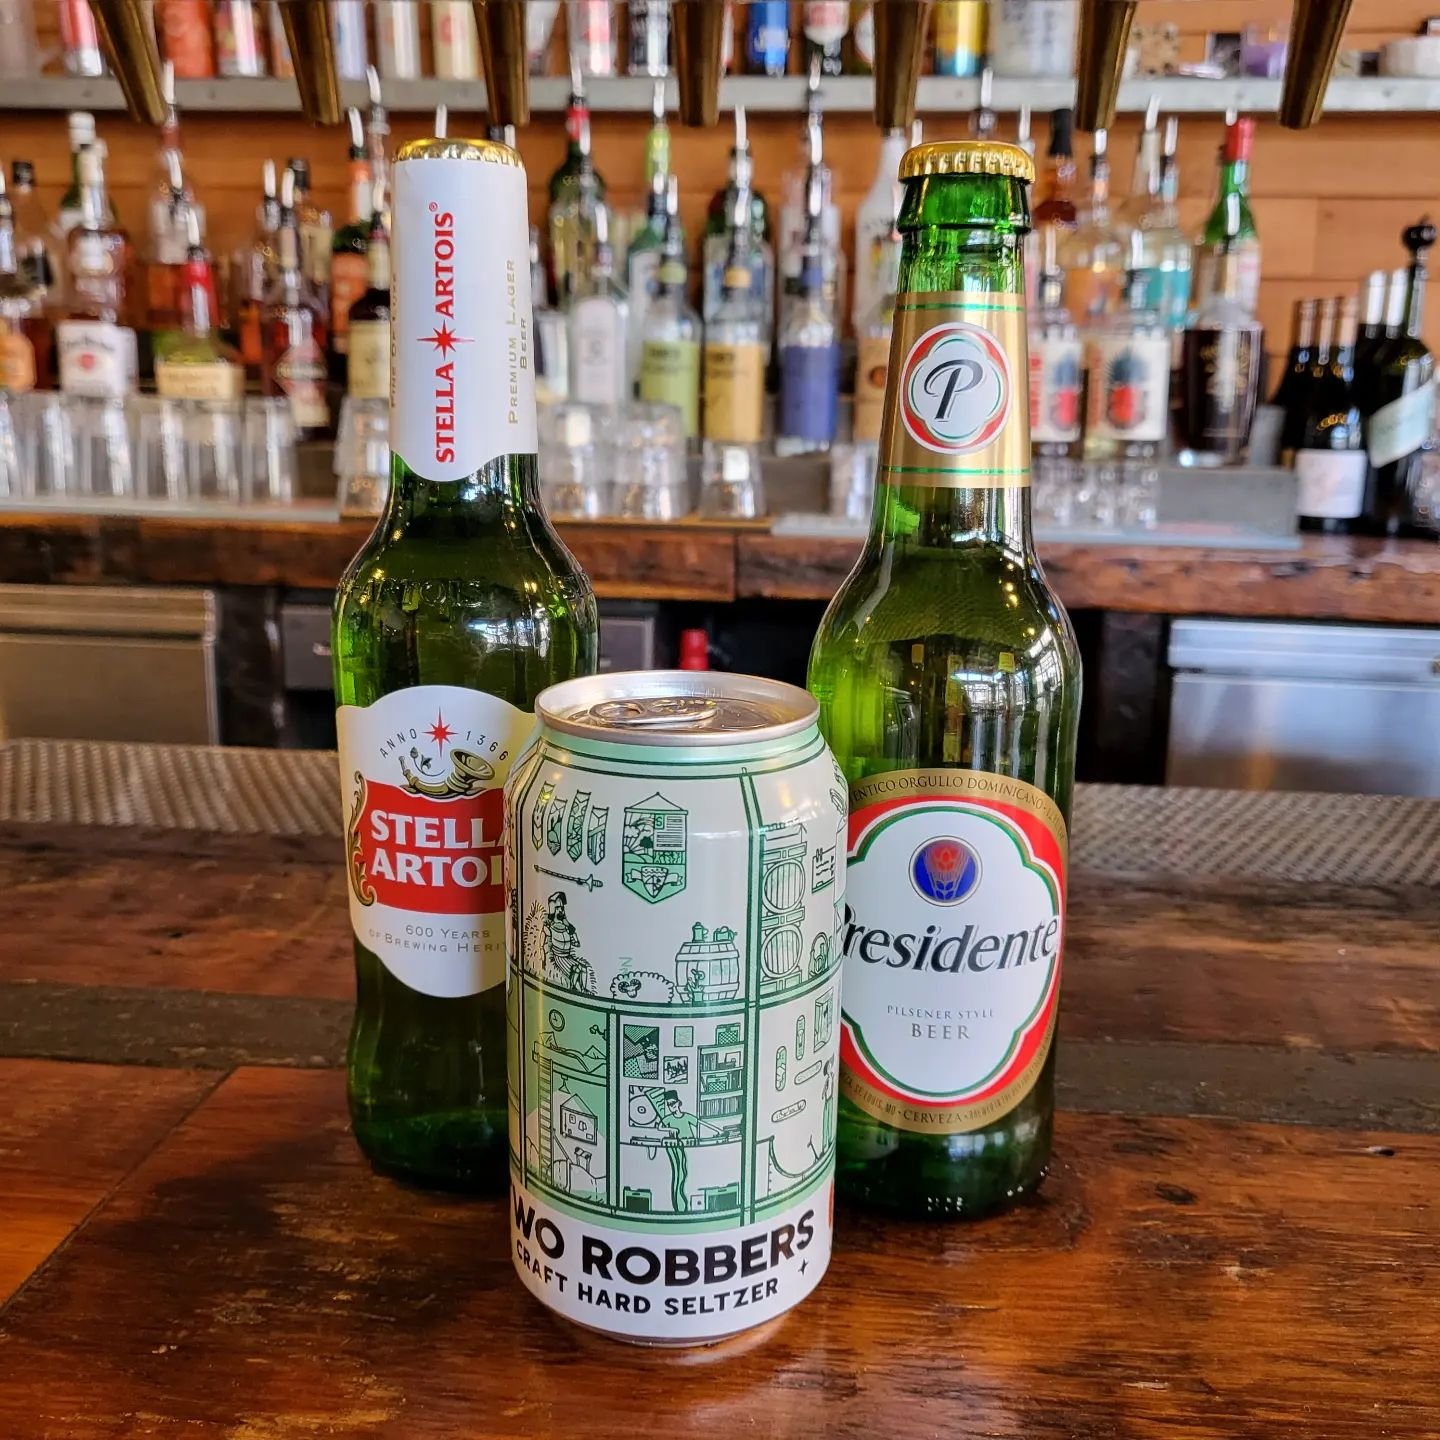 It's almost St. Patrick's Day weekend! Come celebrate with us and check out the green brews we have at Franklin 820 - @stellaartois, @cervpresidente and @two_robbers Hard Seltzer ☘️🌟
.
.
.
.
.
.
.
.
.
#brooklyn #bar #drinks #stpatricksdayevent #broo